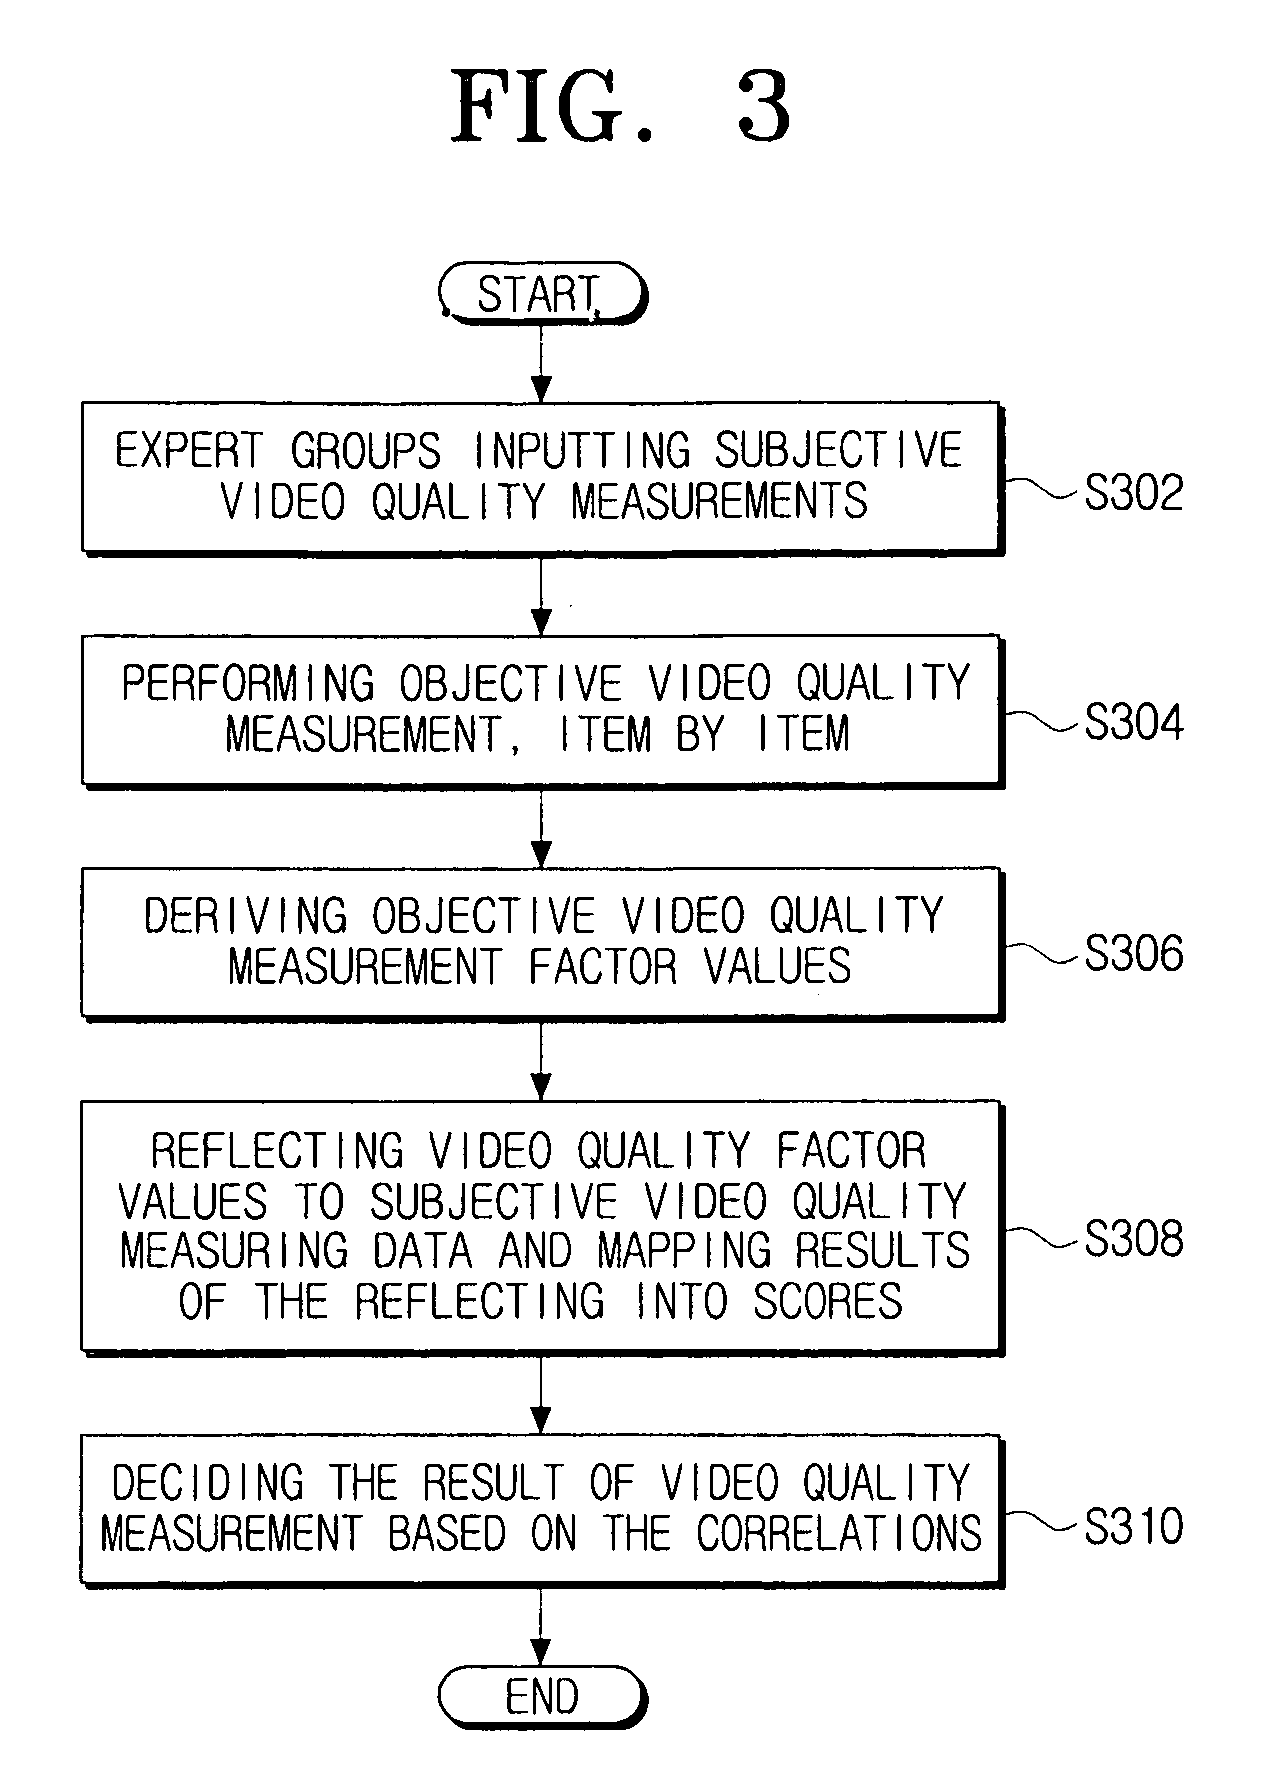 Method and system for measuring video quality